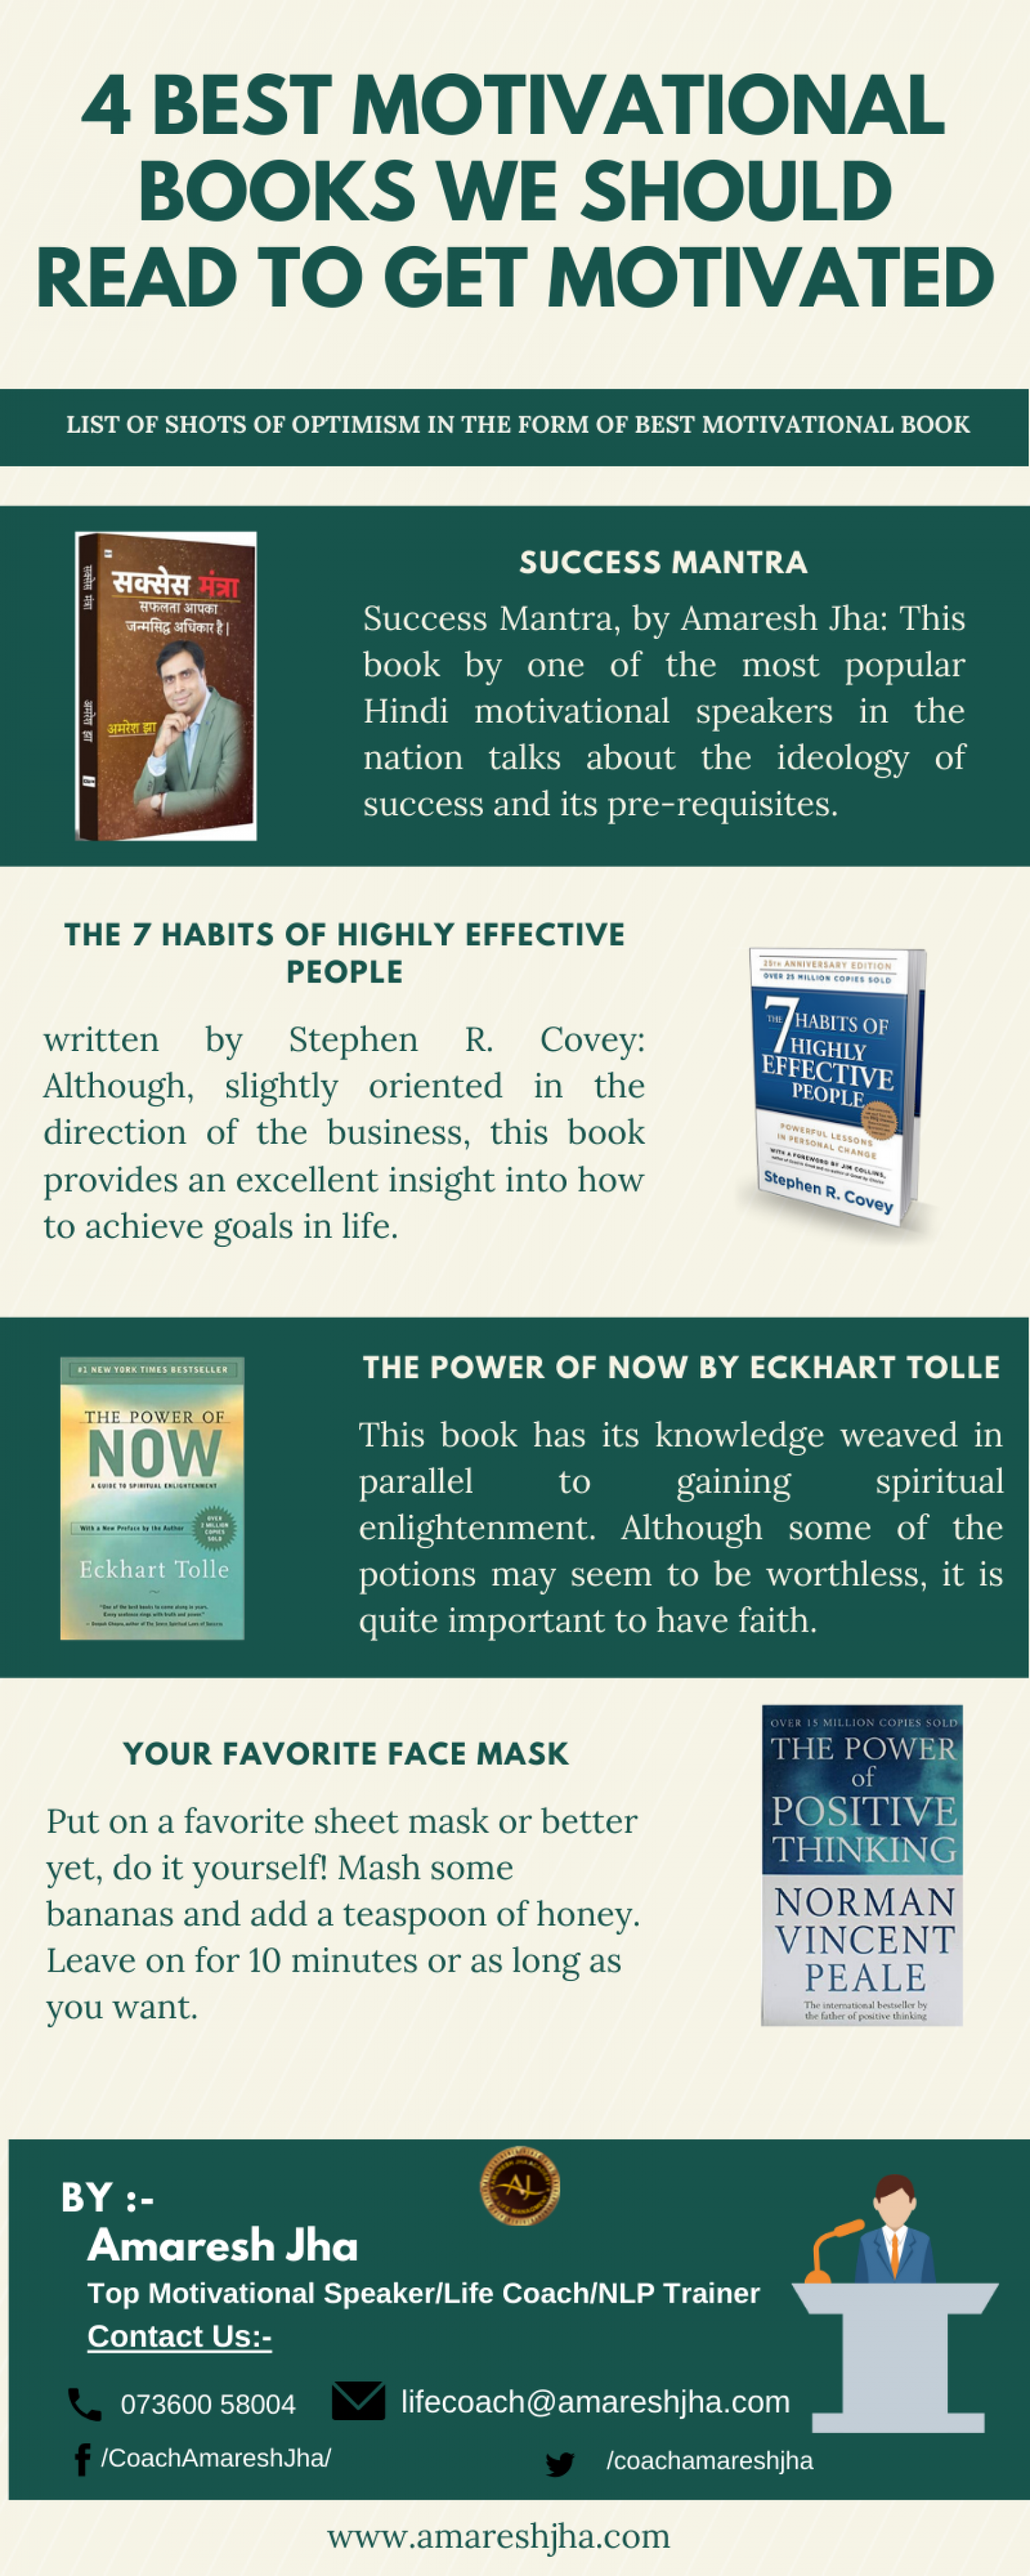 4 Best Motivational Books We Should Read To Get Motivated Infographic